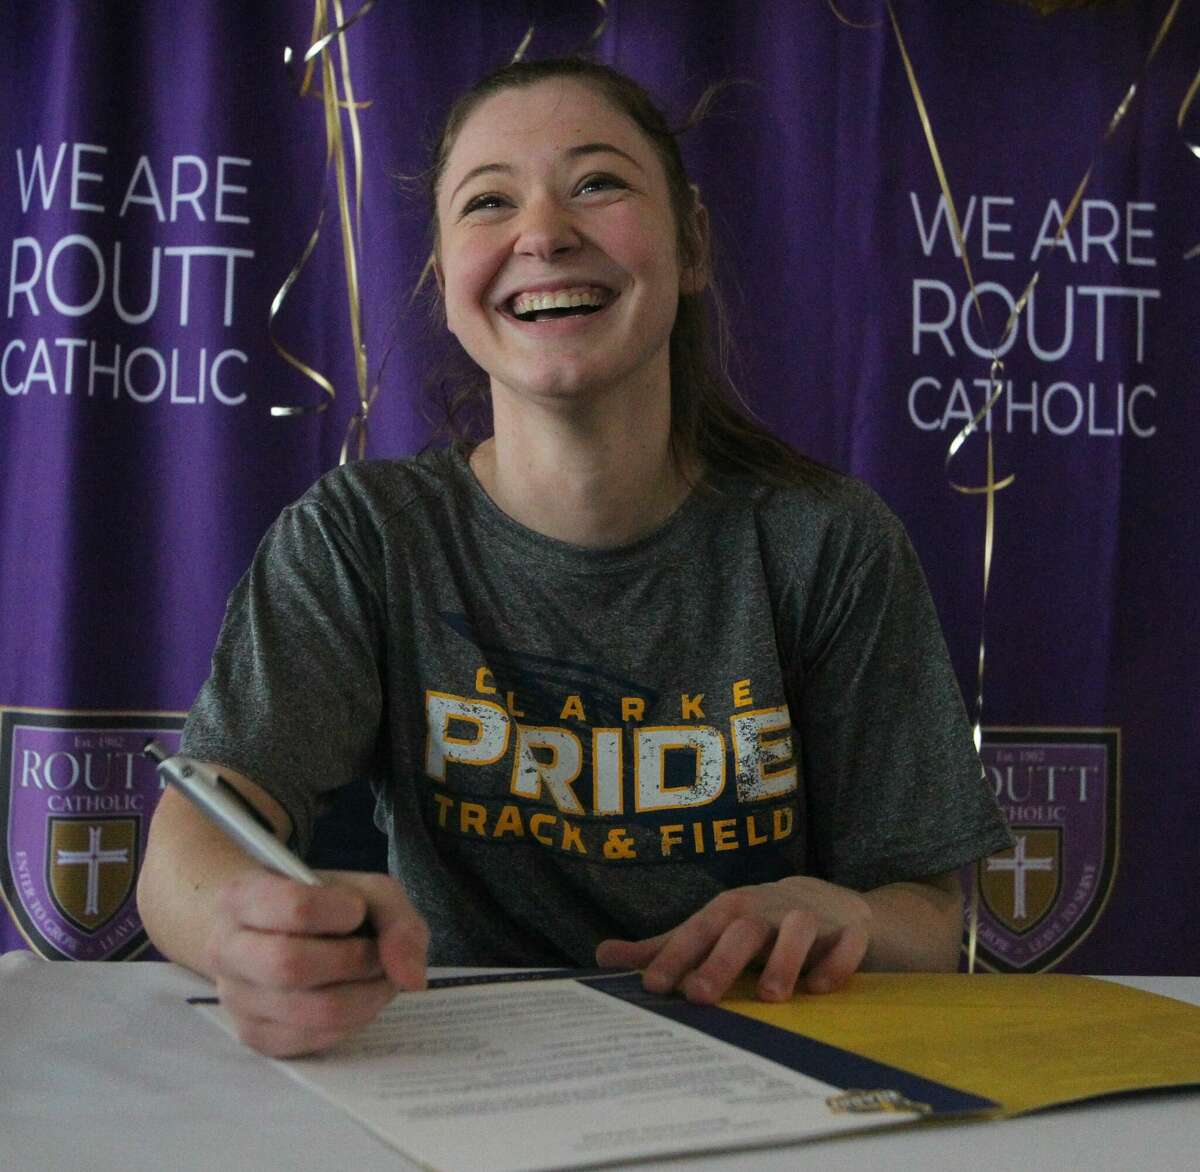 Emma Terwische smiles during a signing ceremony earlier this month at Routt Catholic High School.